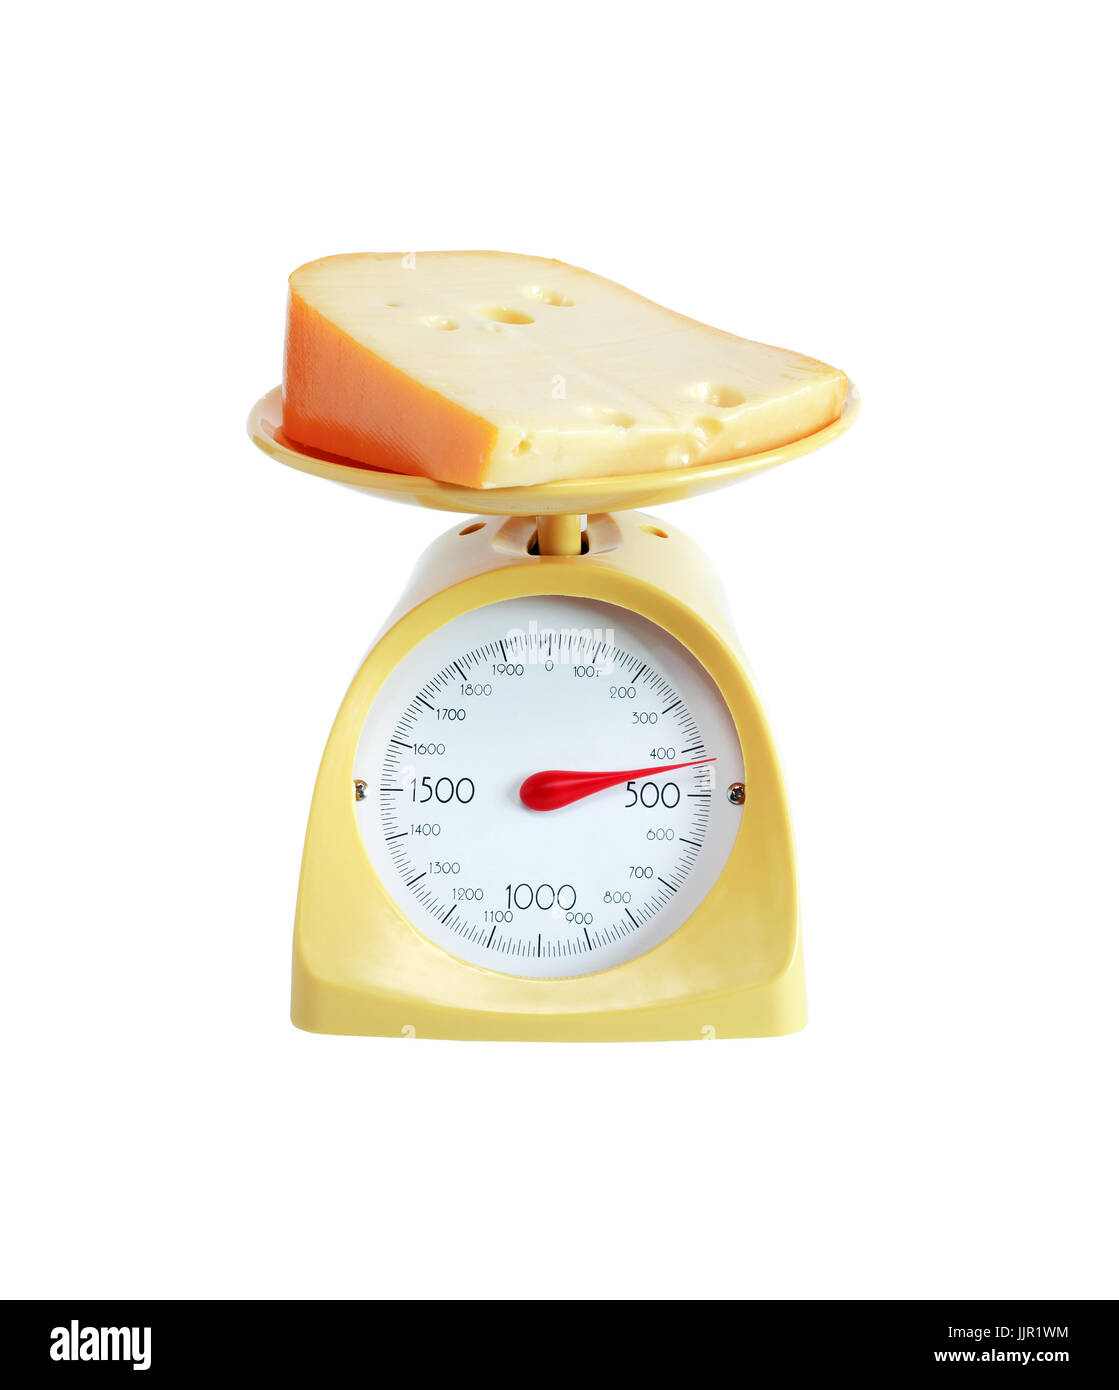 https://c8.alamy.com/comp/JJR1WM/piece-of-cheese-lying-on-nice-yellow-kitchen-scale-isolated-on-white-JJR1WM.jpg